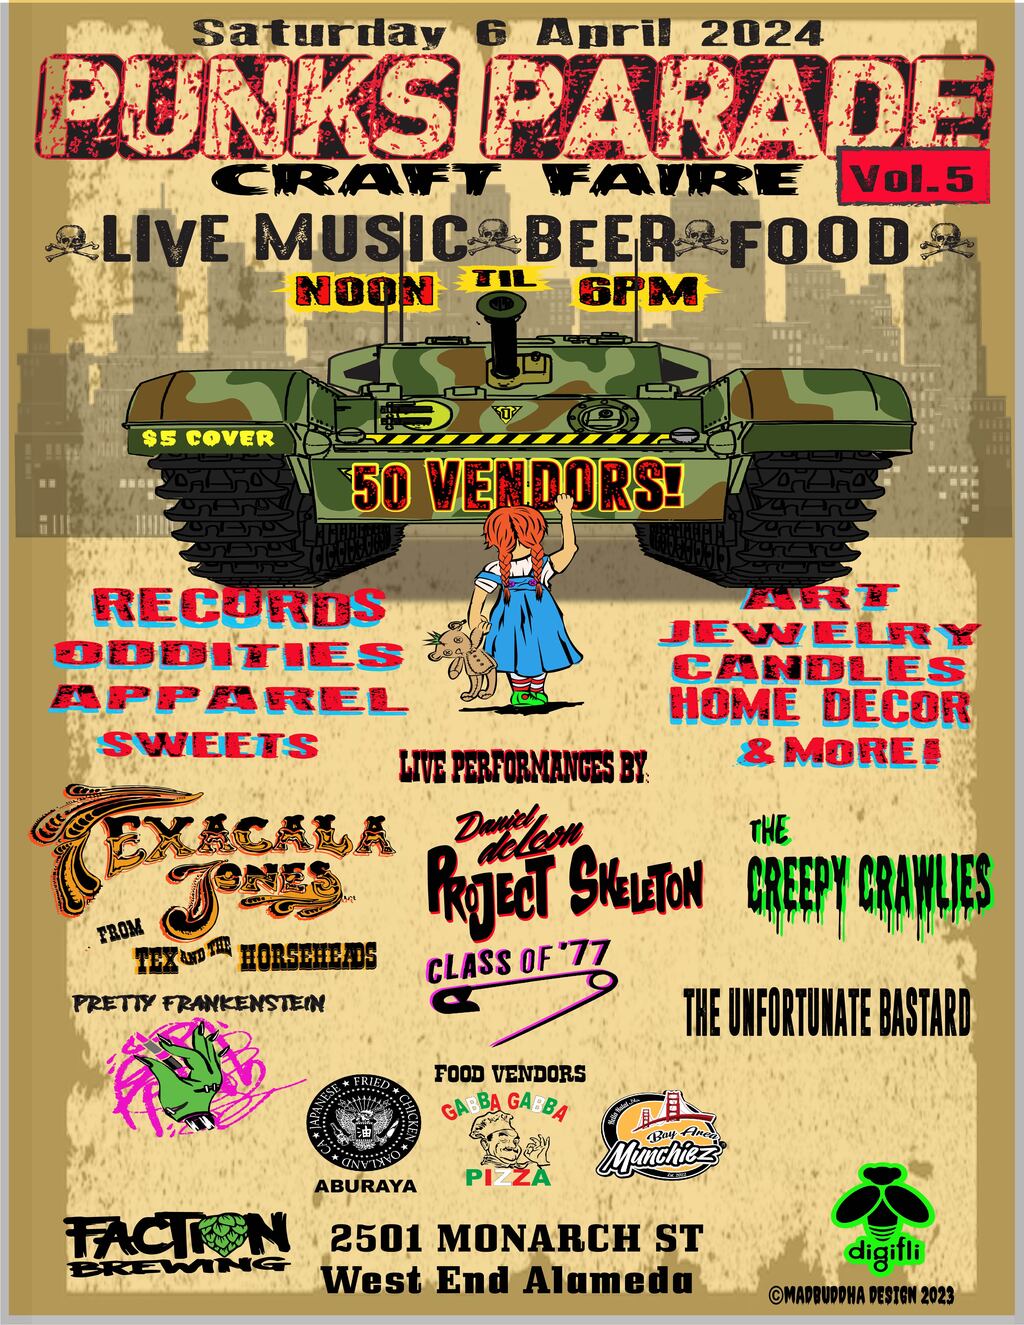  Spring Fling Craft Fair Vol 5  Featuring Live Music  Beer  and Food  promotion flier on Digifli com